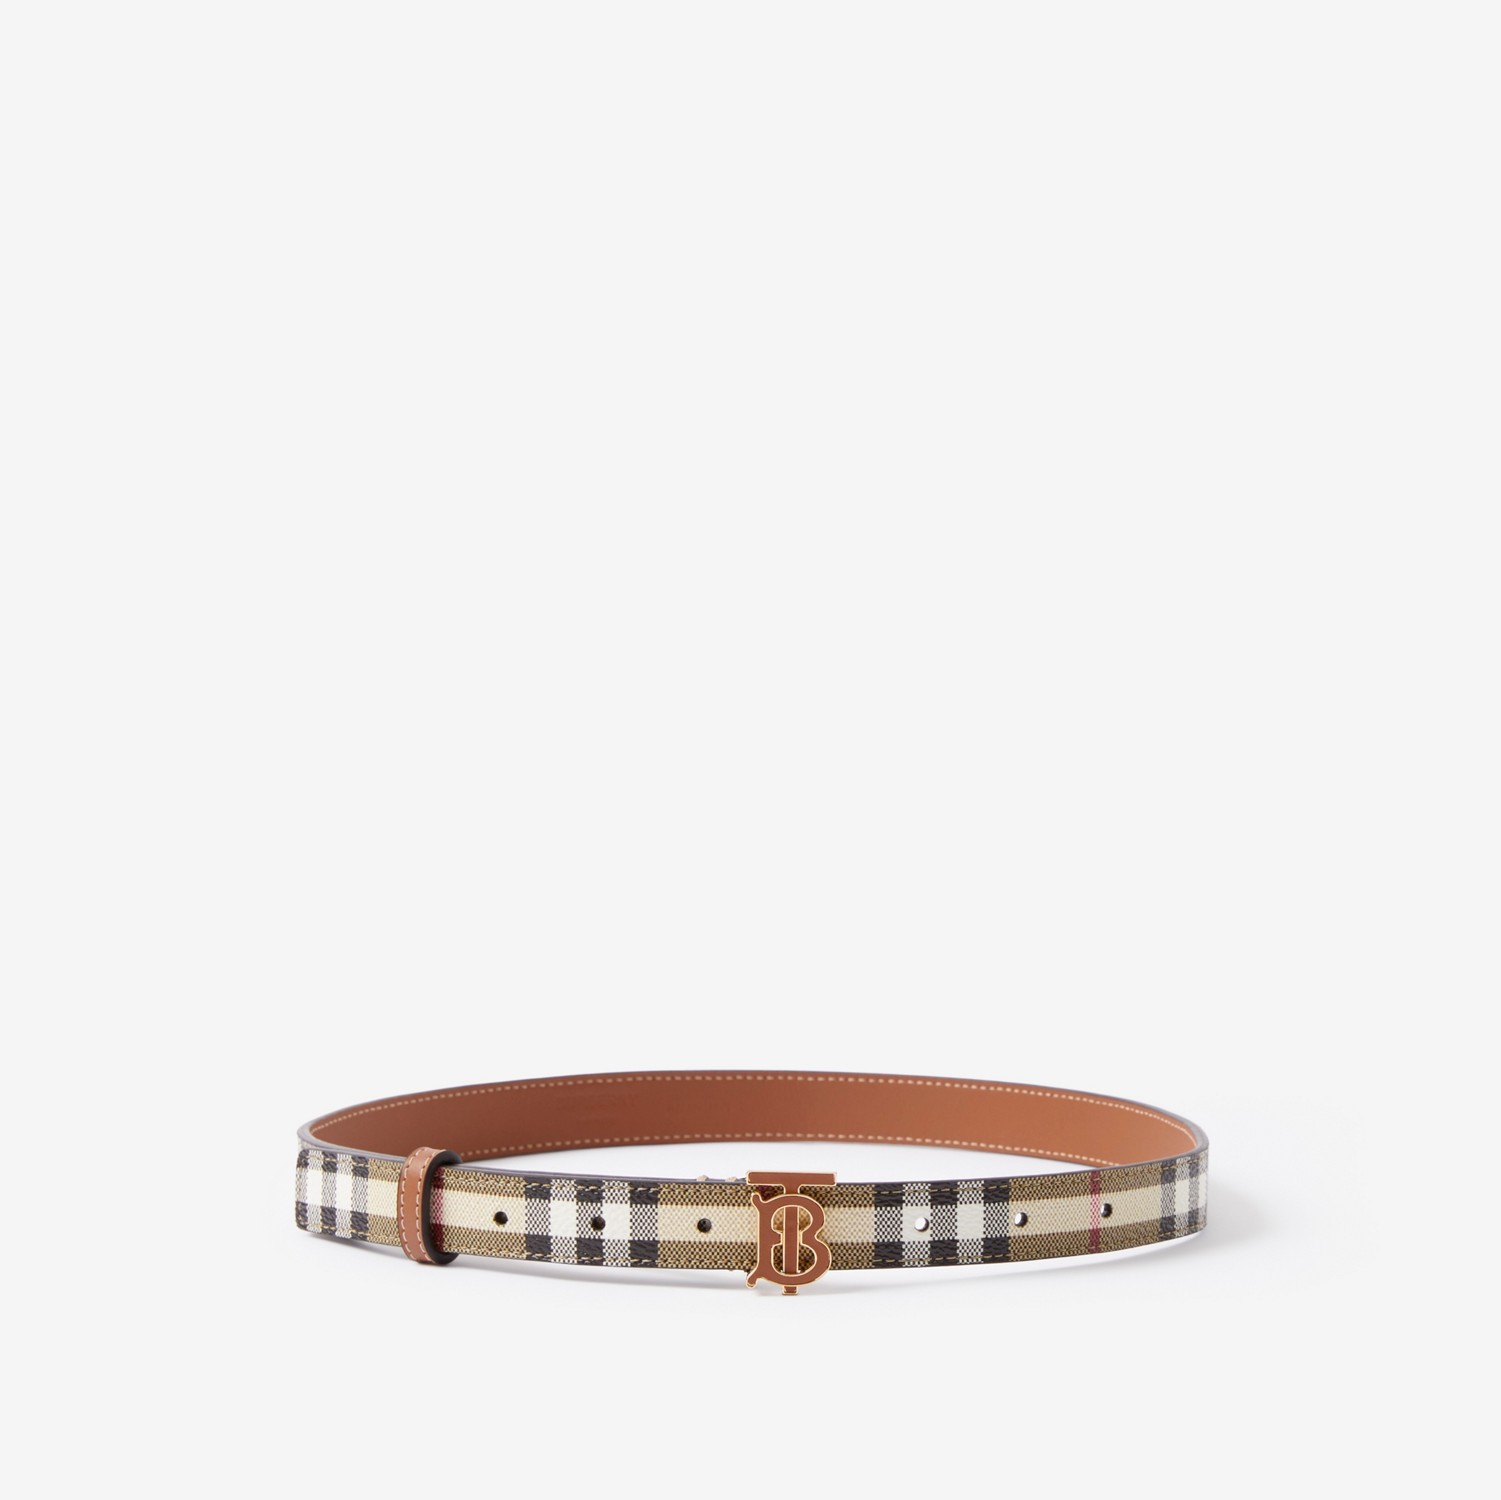 Check and Leather TB Belt in Archive beige/briar brown - Women